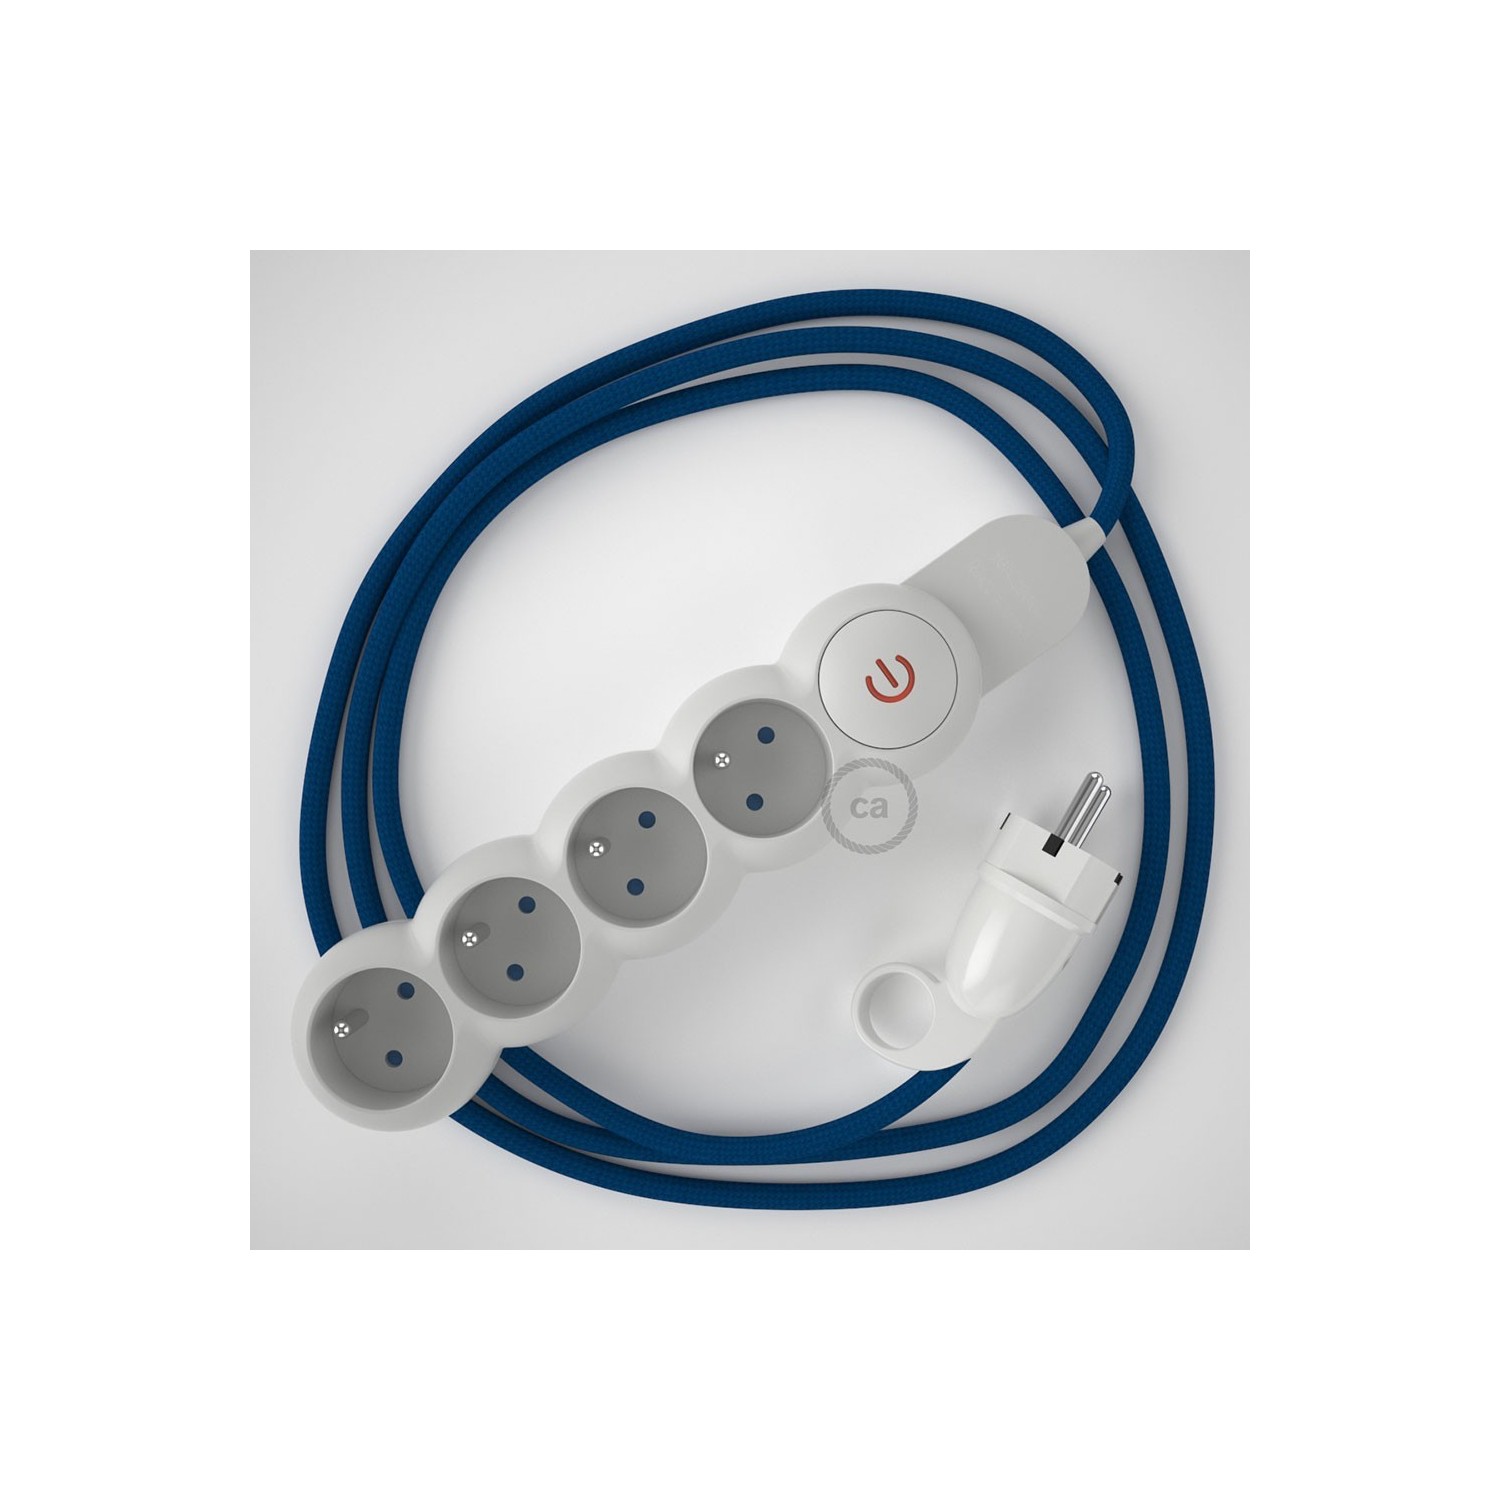 Power Strip with electrical cable covered in rayon Blue fabric RM12 and ...